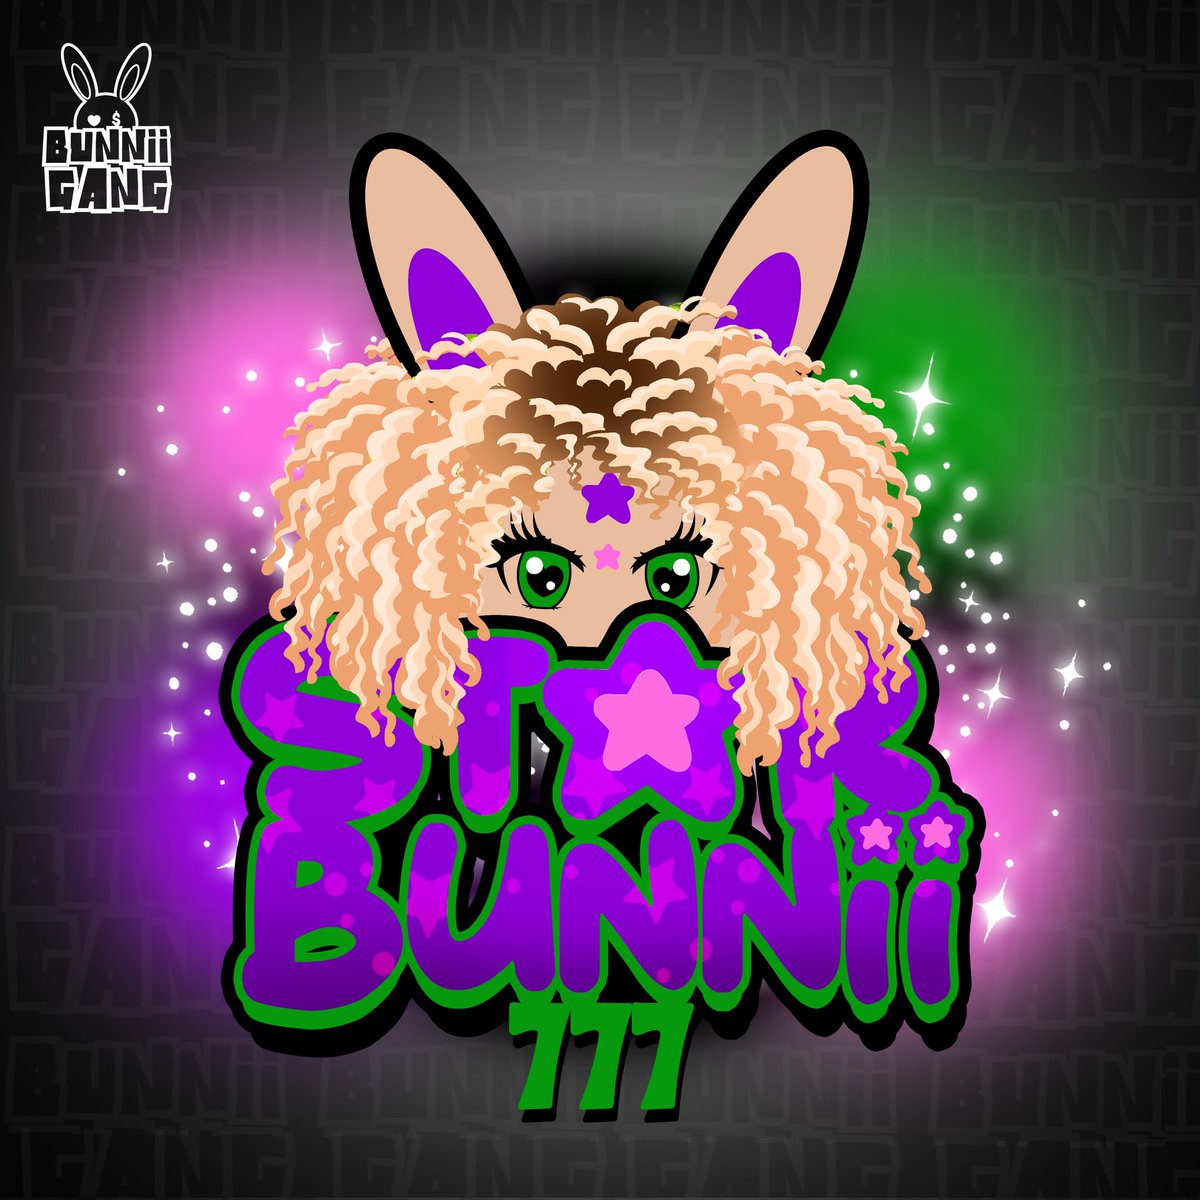 WE ARE EXCITED TO ANNOUNCE OUR NEWEST COLLABORATION W/ GAMING CONTENT CREATOR
@StarAkay777 GANG, GANG!!! THE 'STAR BUNNII' WILL BE DROPPING SOON AT BUNNIIGANG.COM #BUNNIIGANG #HOPWITUS